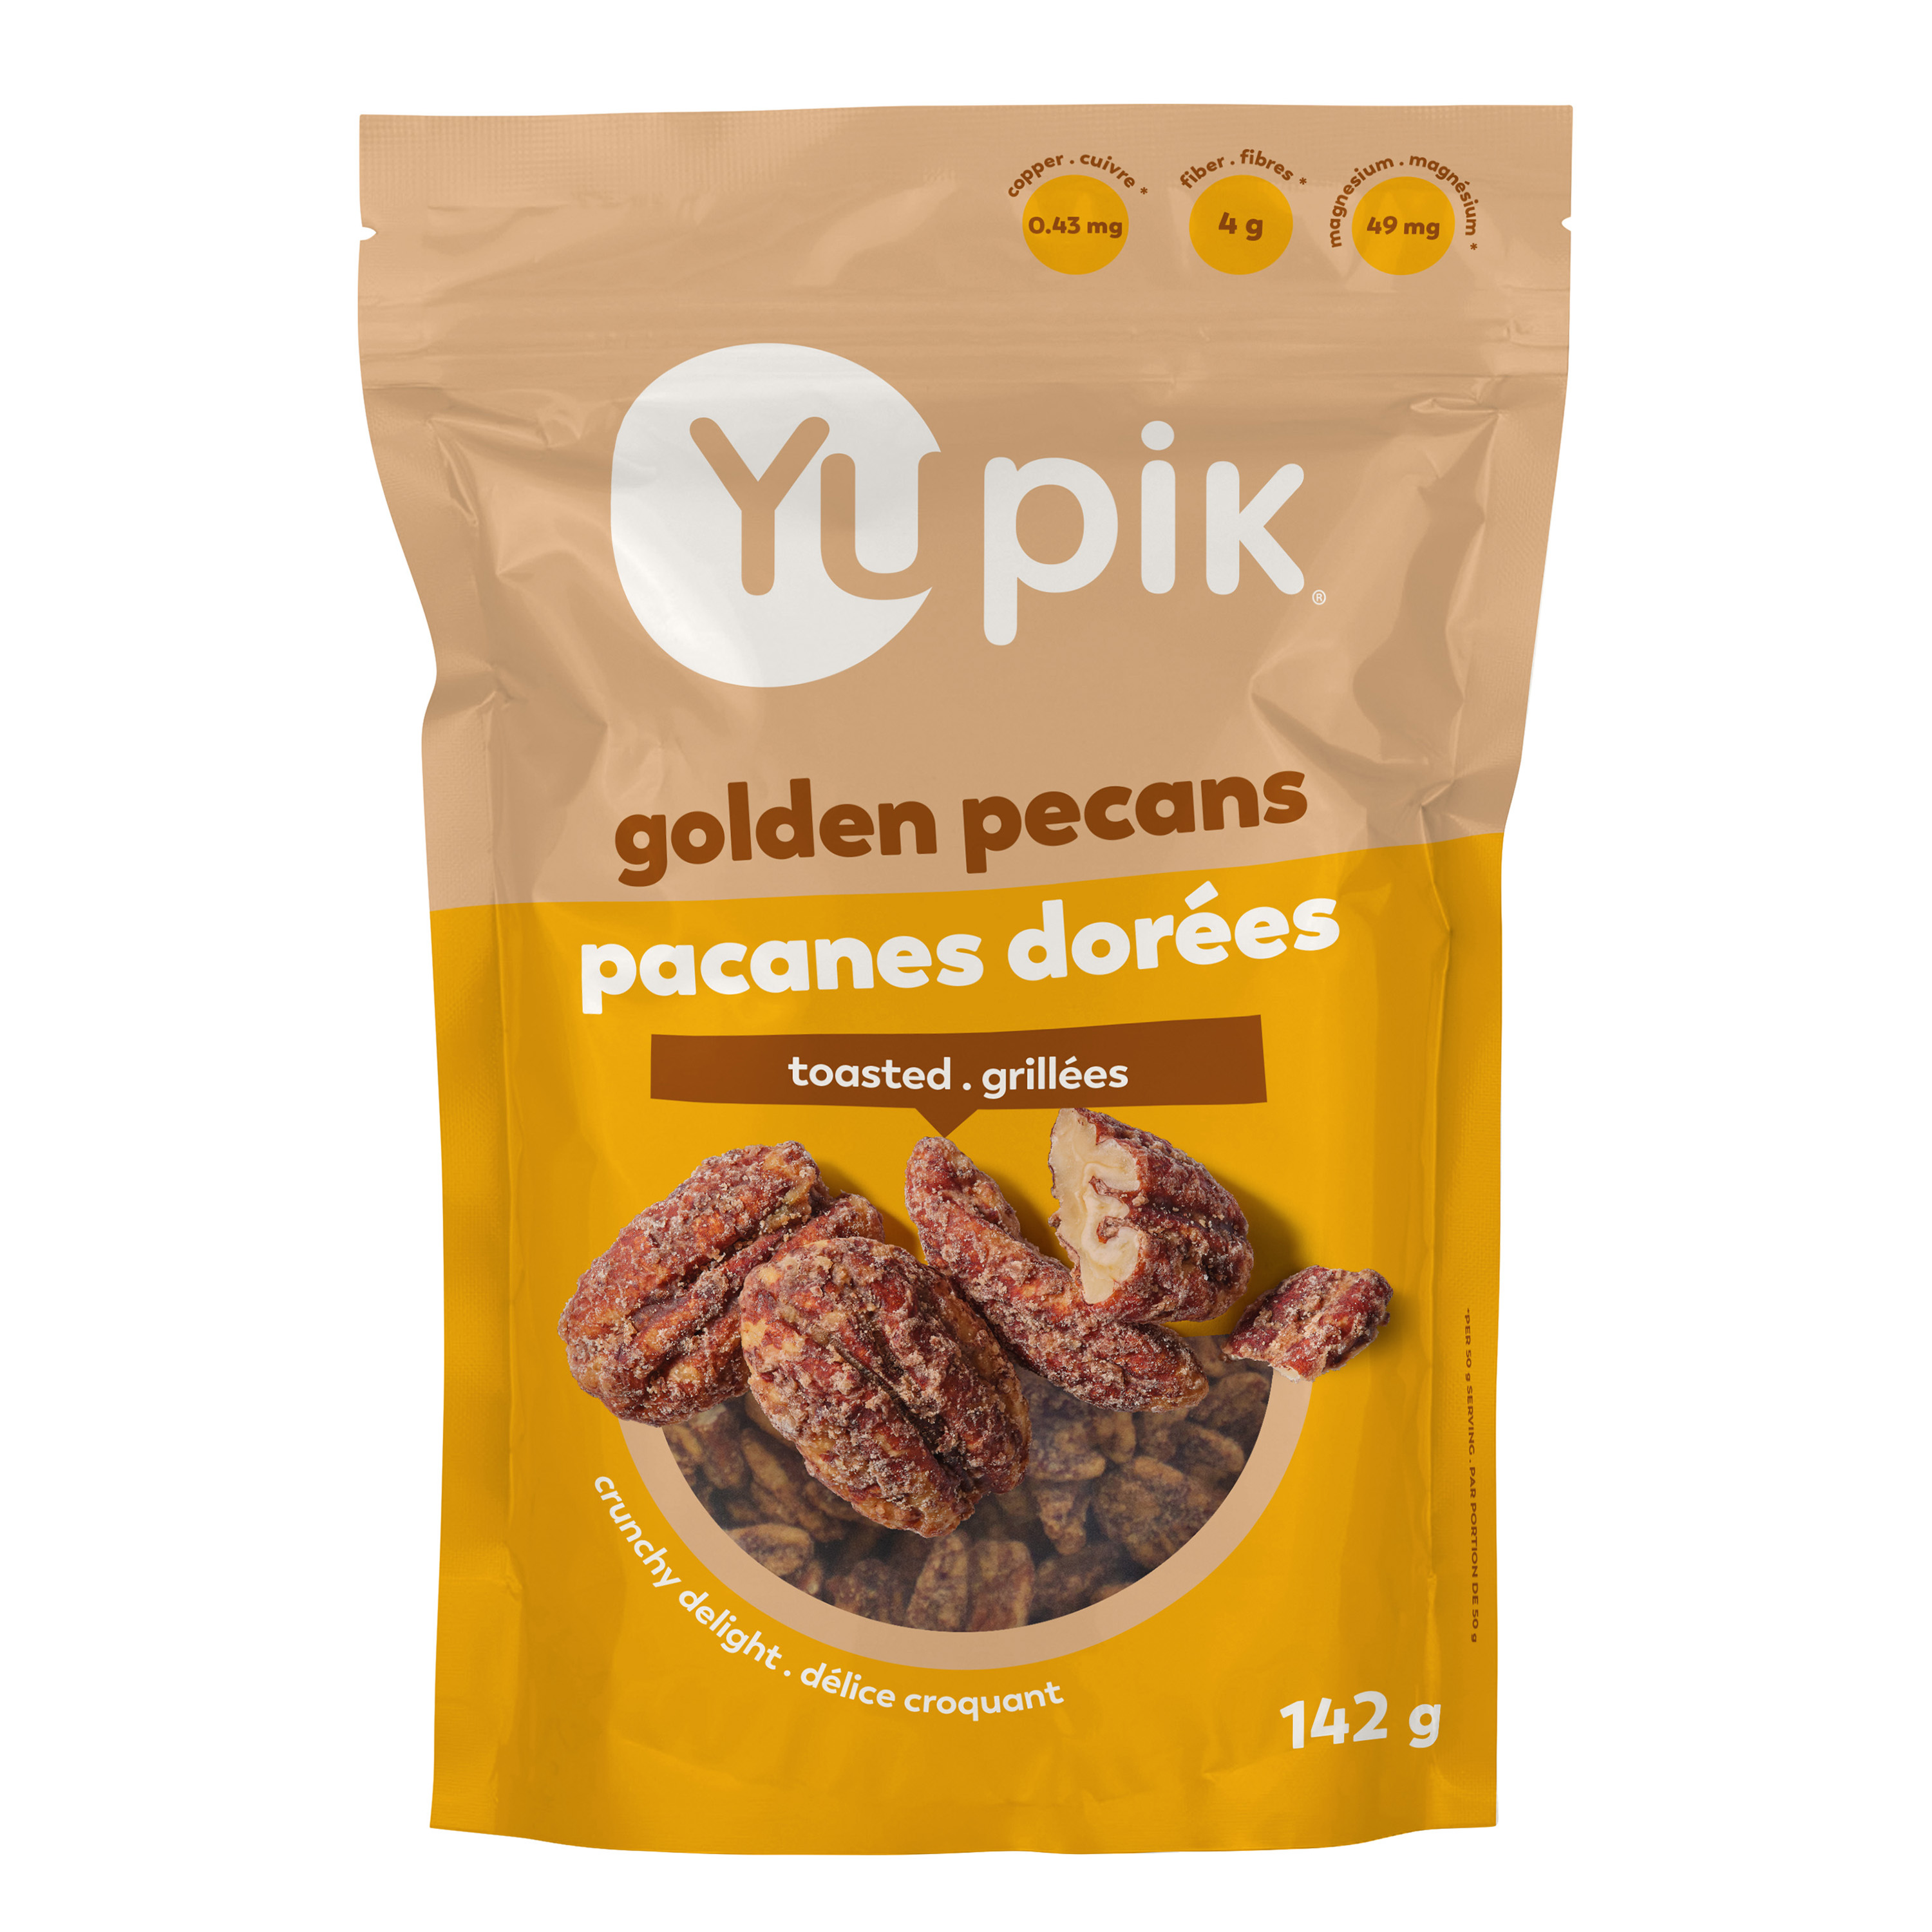 Dry roasted pecans, Golden yellow sugar, Brown rice syrup, Propylene glycol, Natural flavors (butter, vanilla), Salt